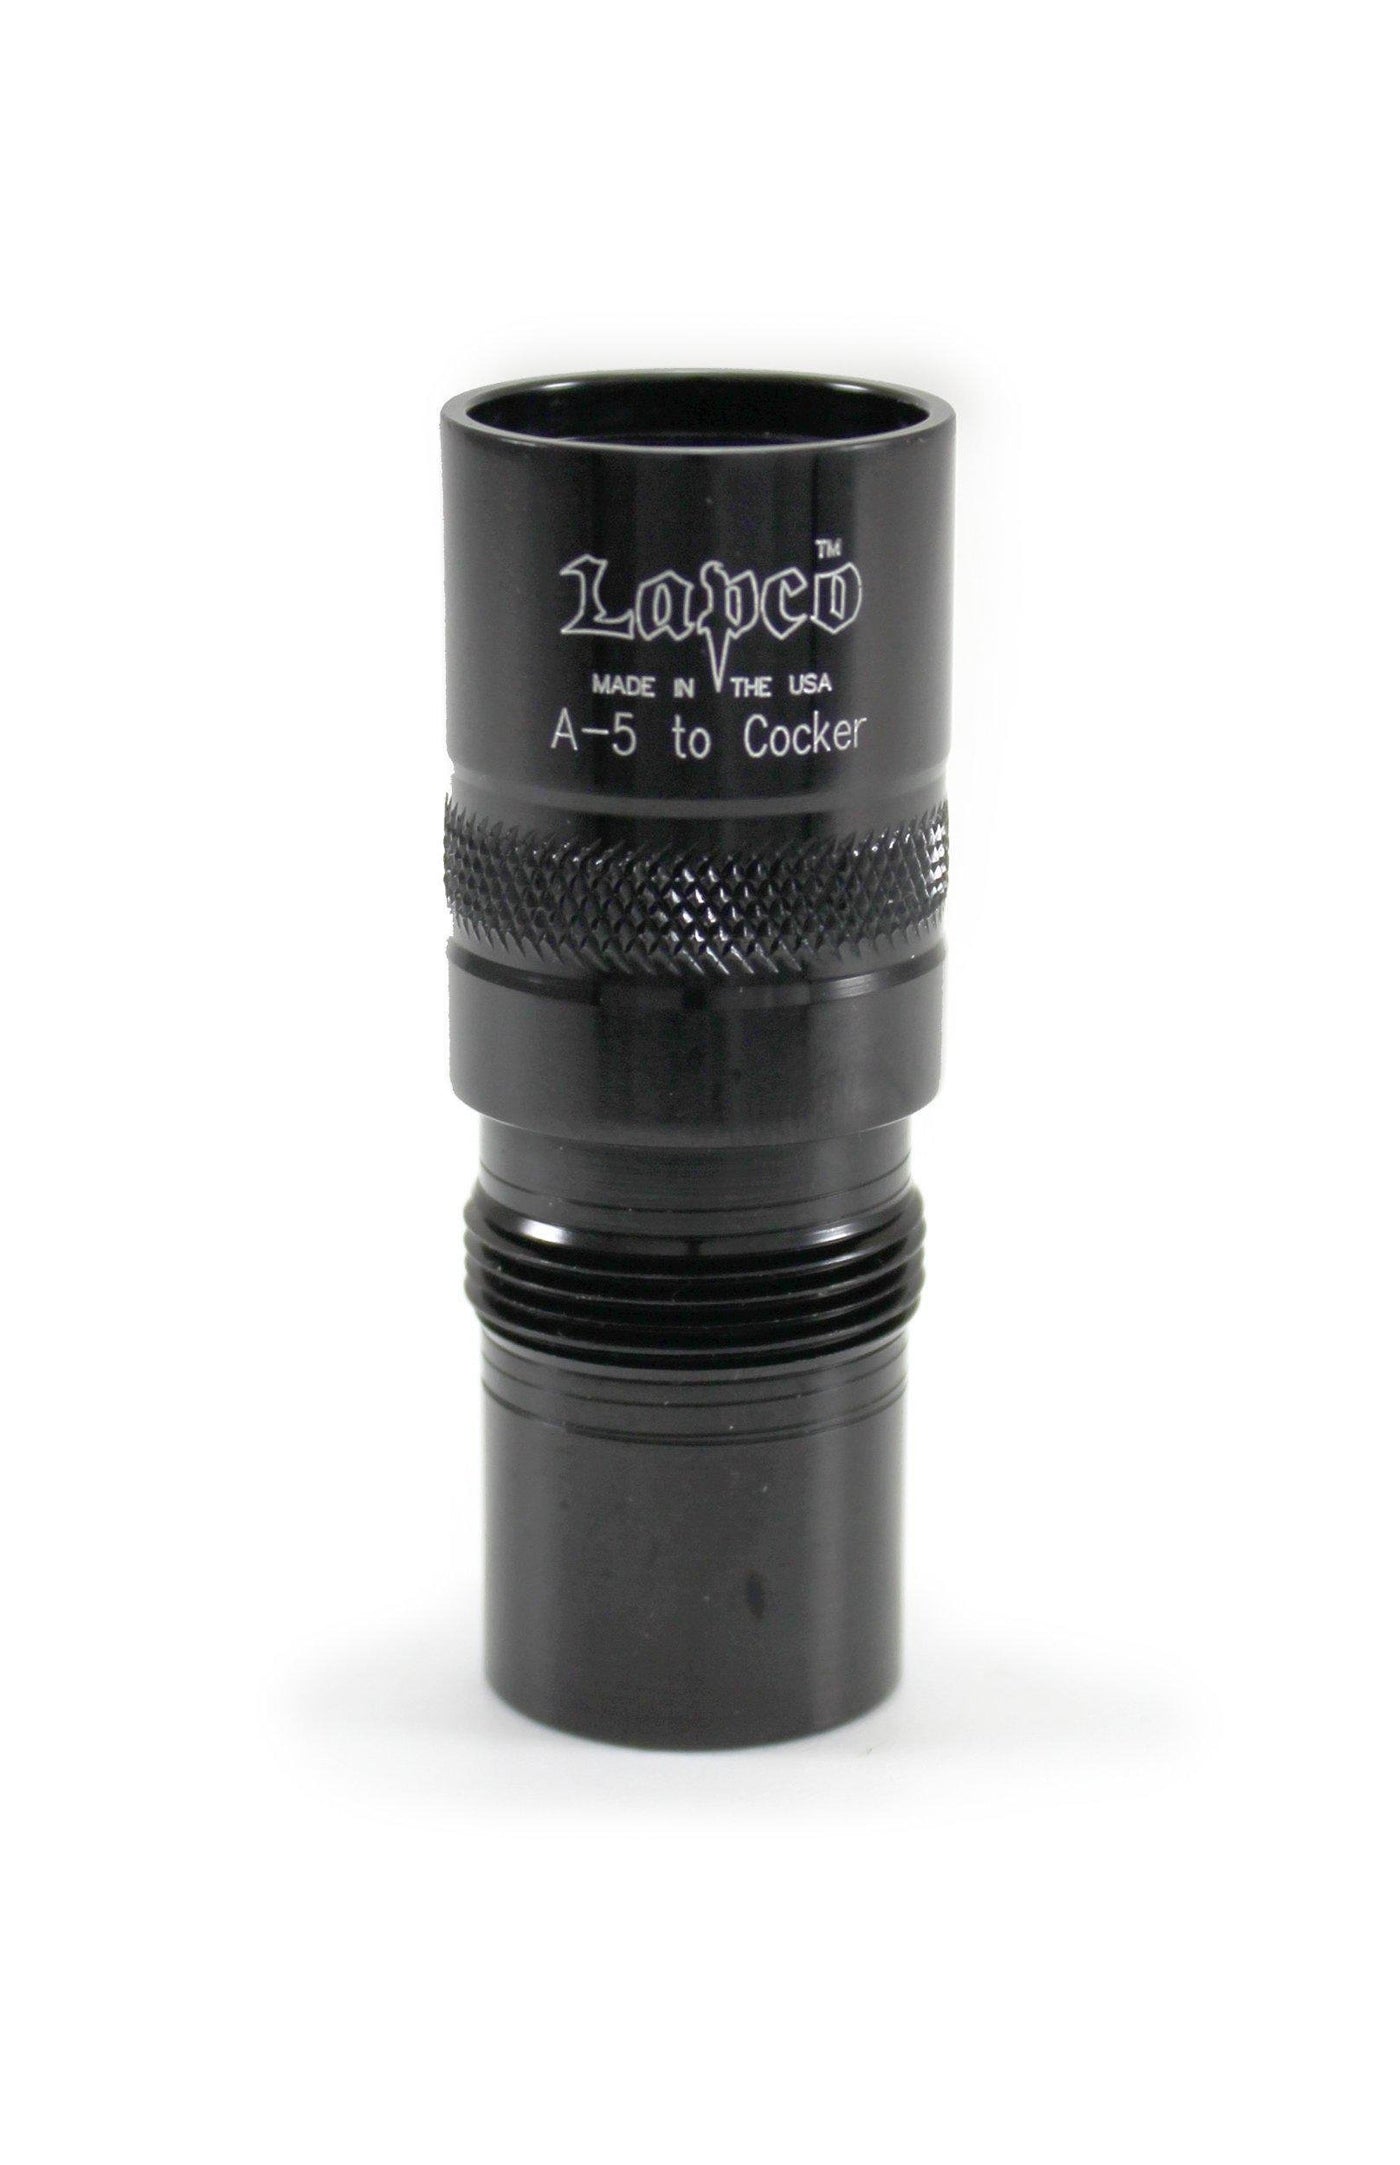 Lapco A5 to Autococker Paintball Barrel Adapter